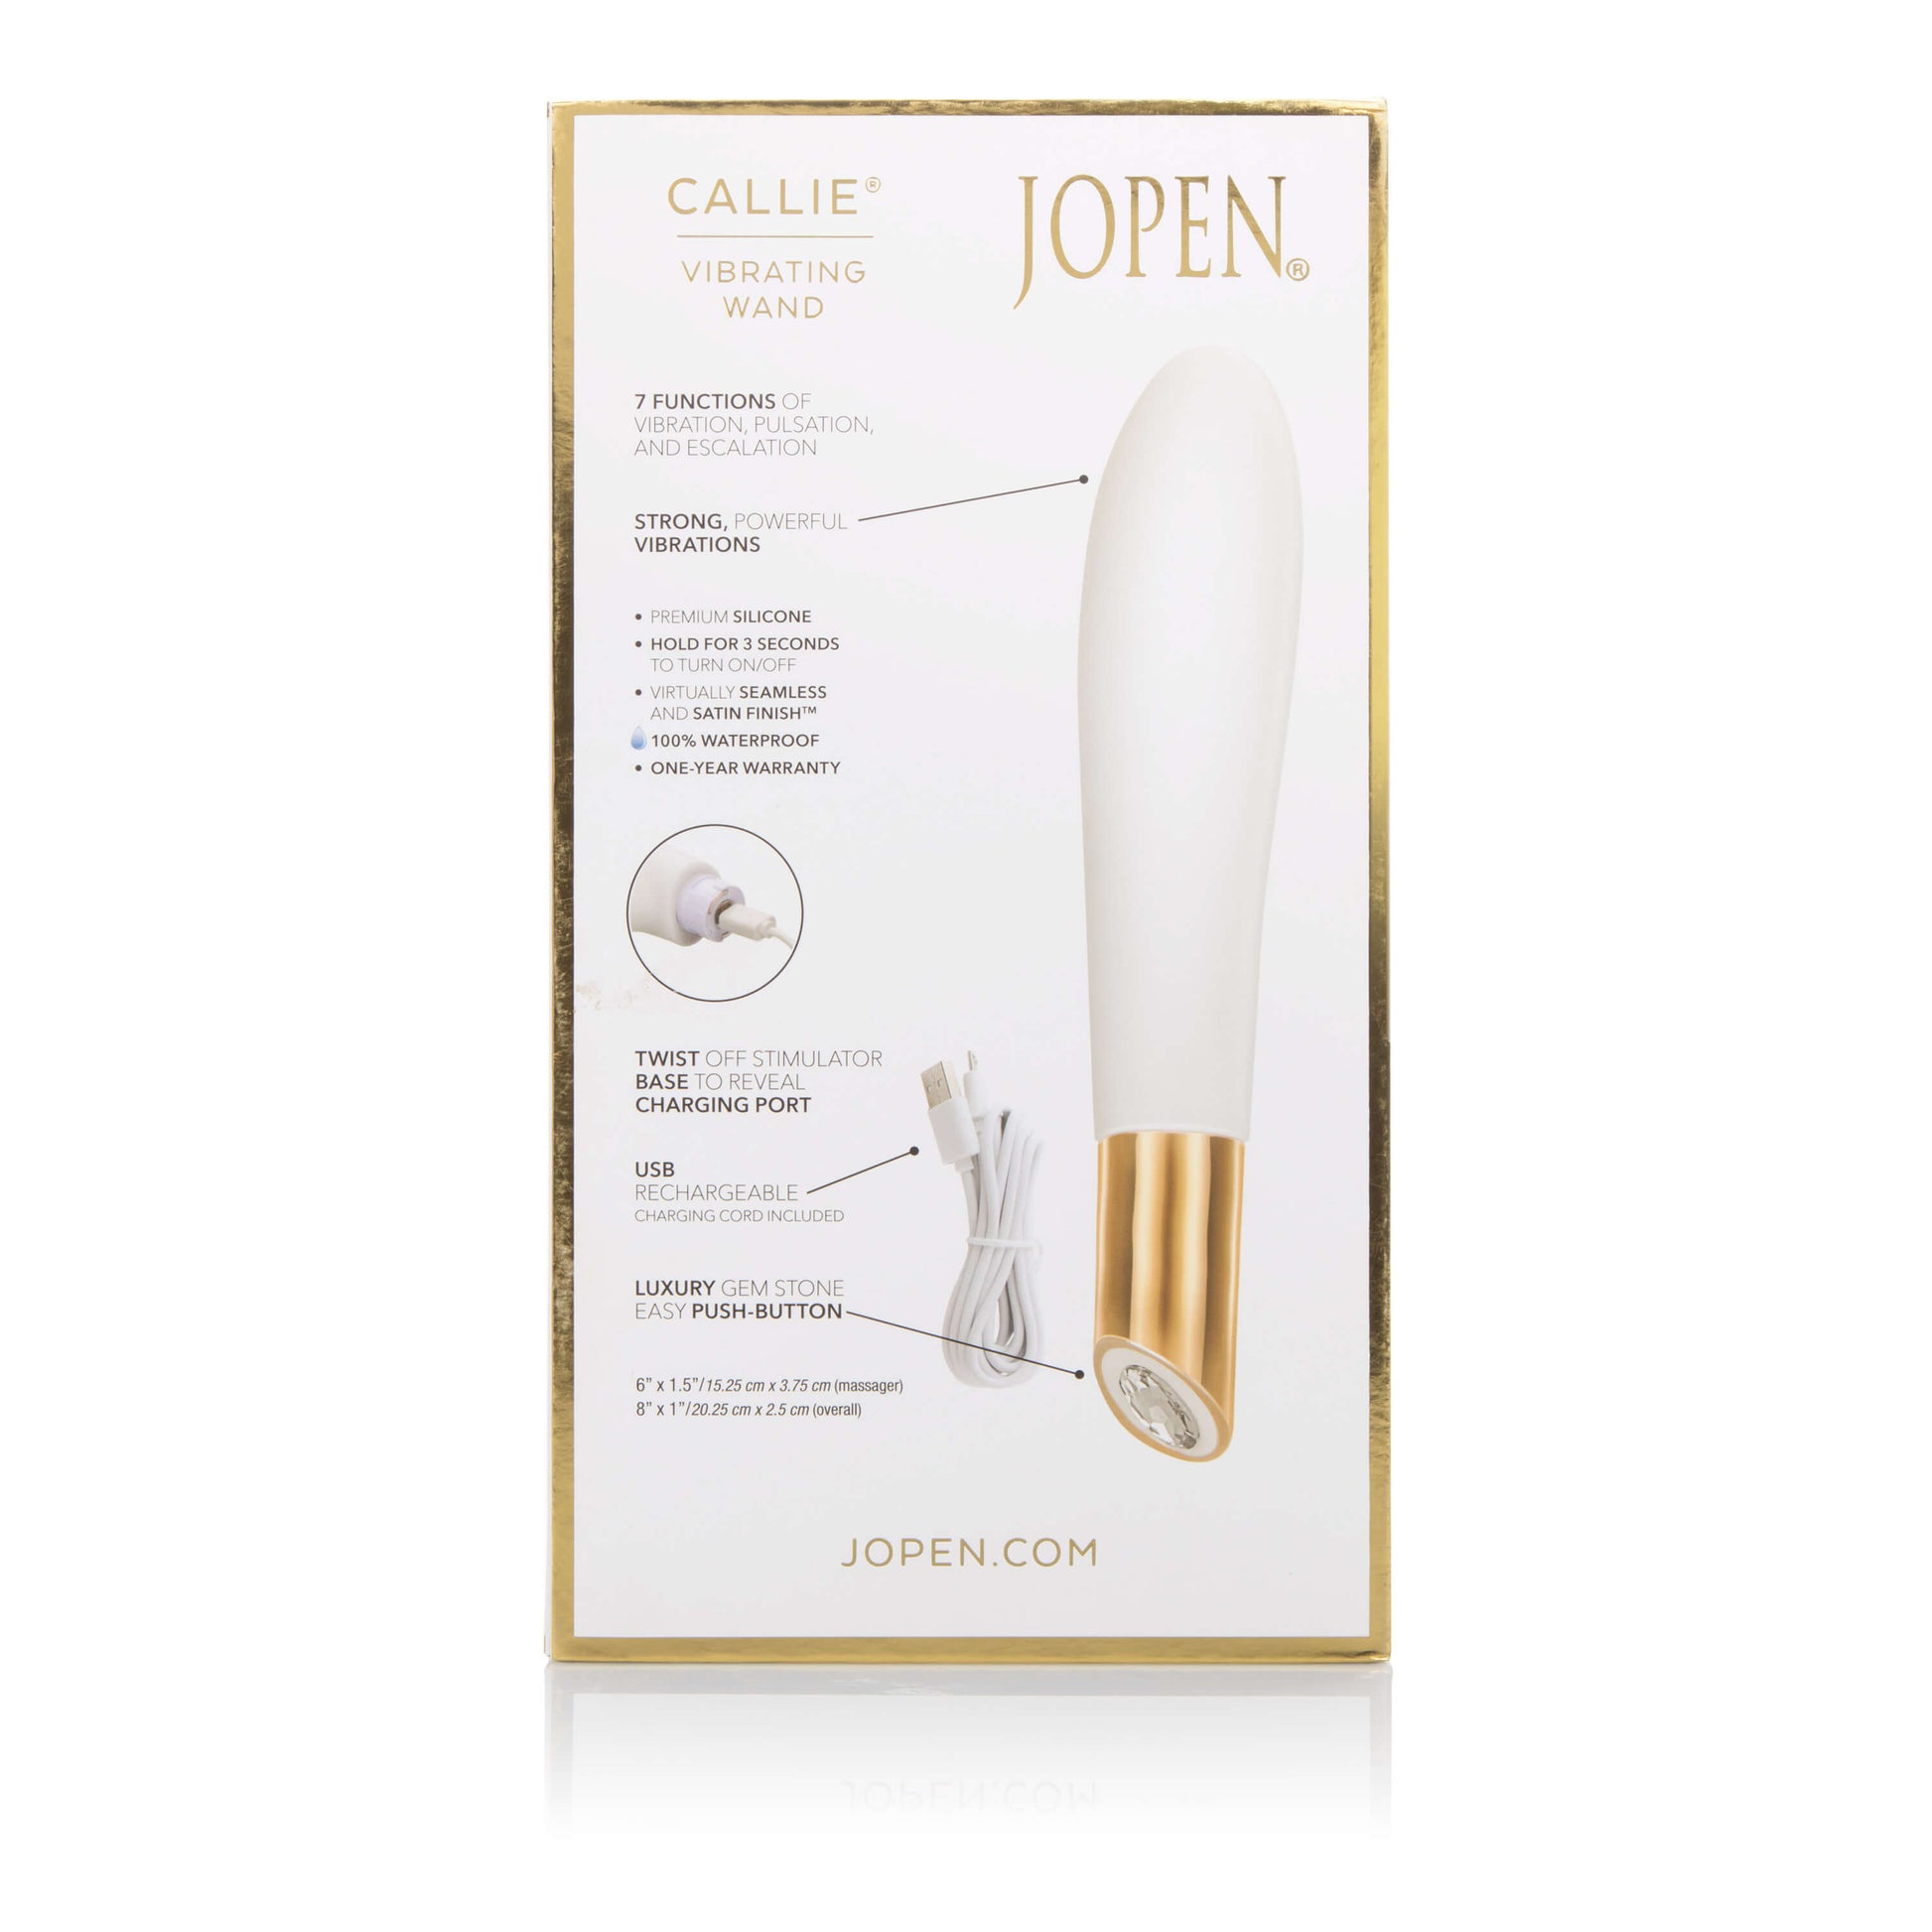 Callie Vibrating Wand - Jopen - The Bigger O - online sex toy shop USA, Canada & UK shipping available